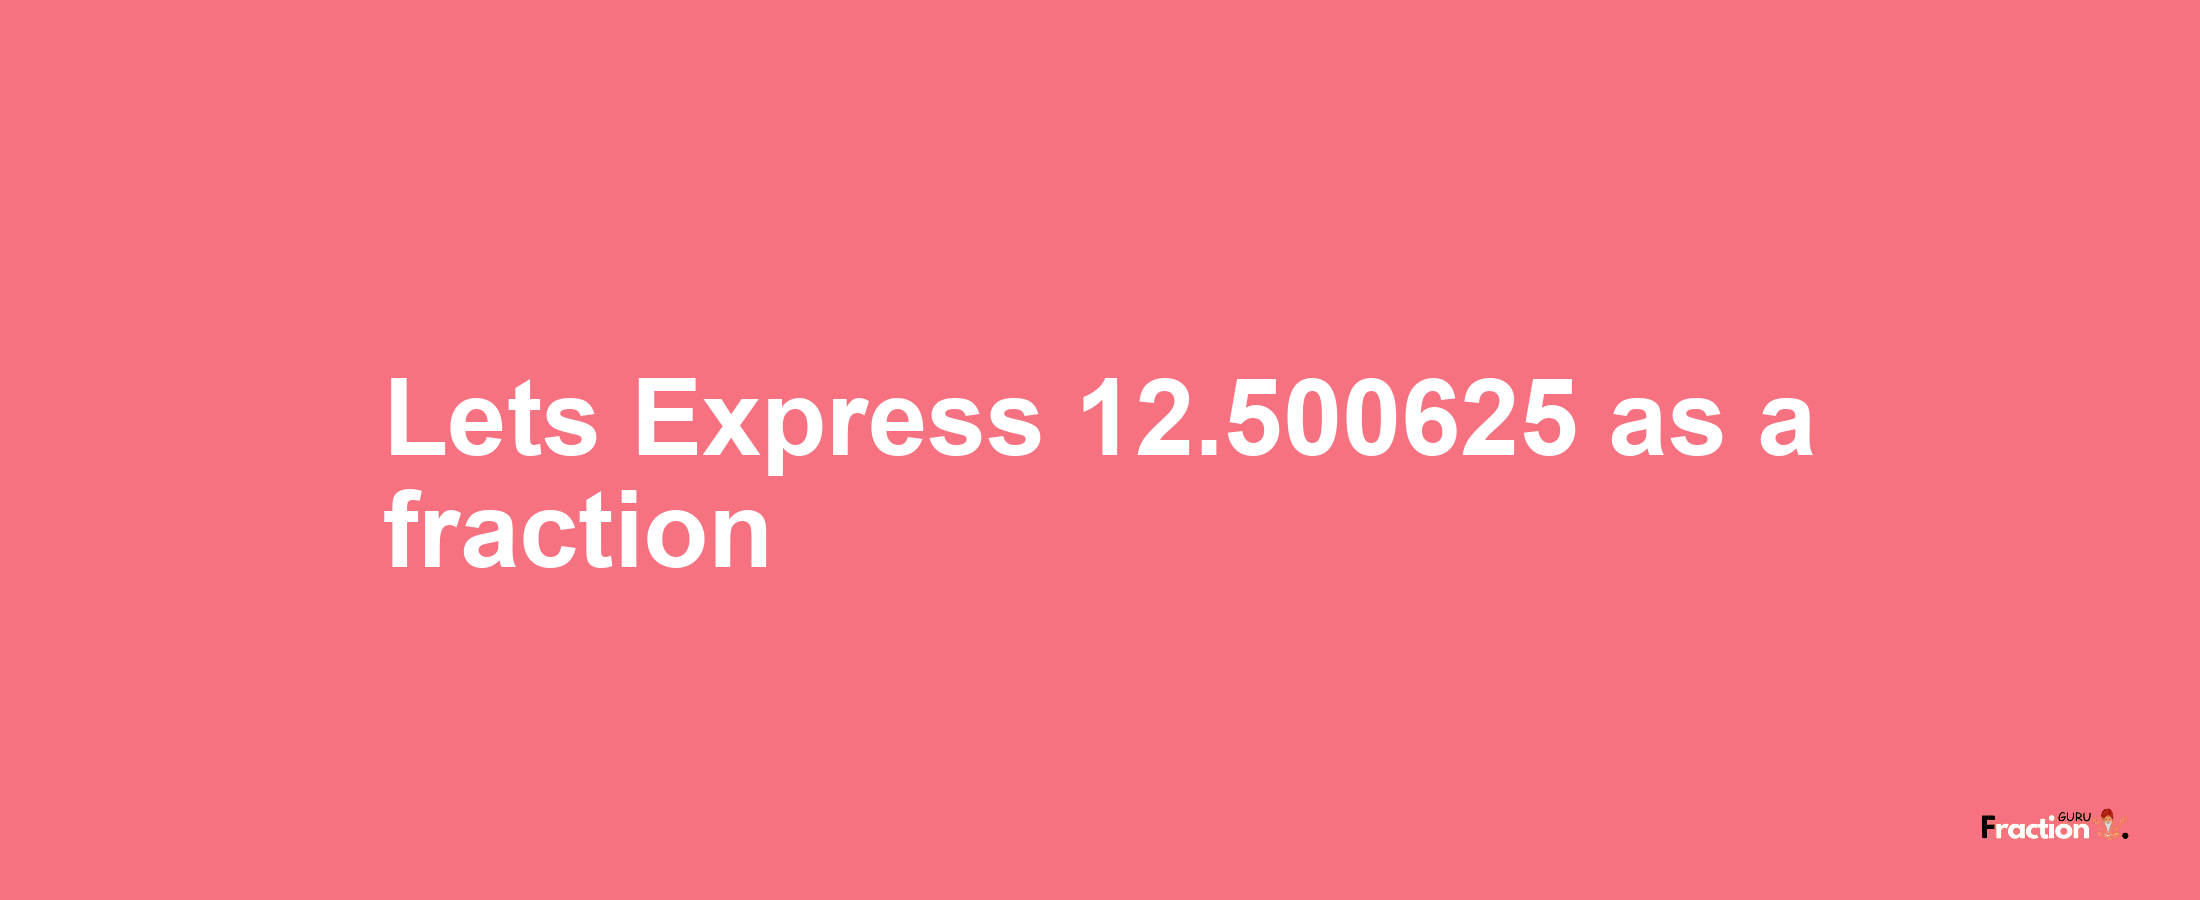 Lets Express 12.500625 as afraction